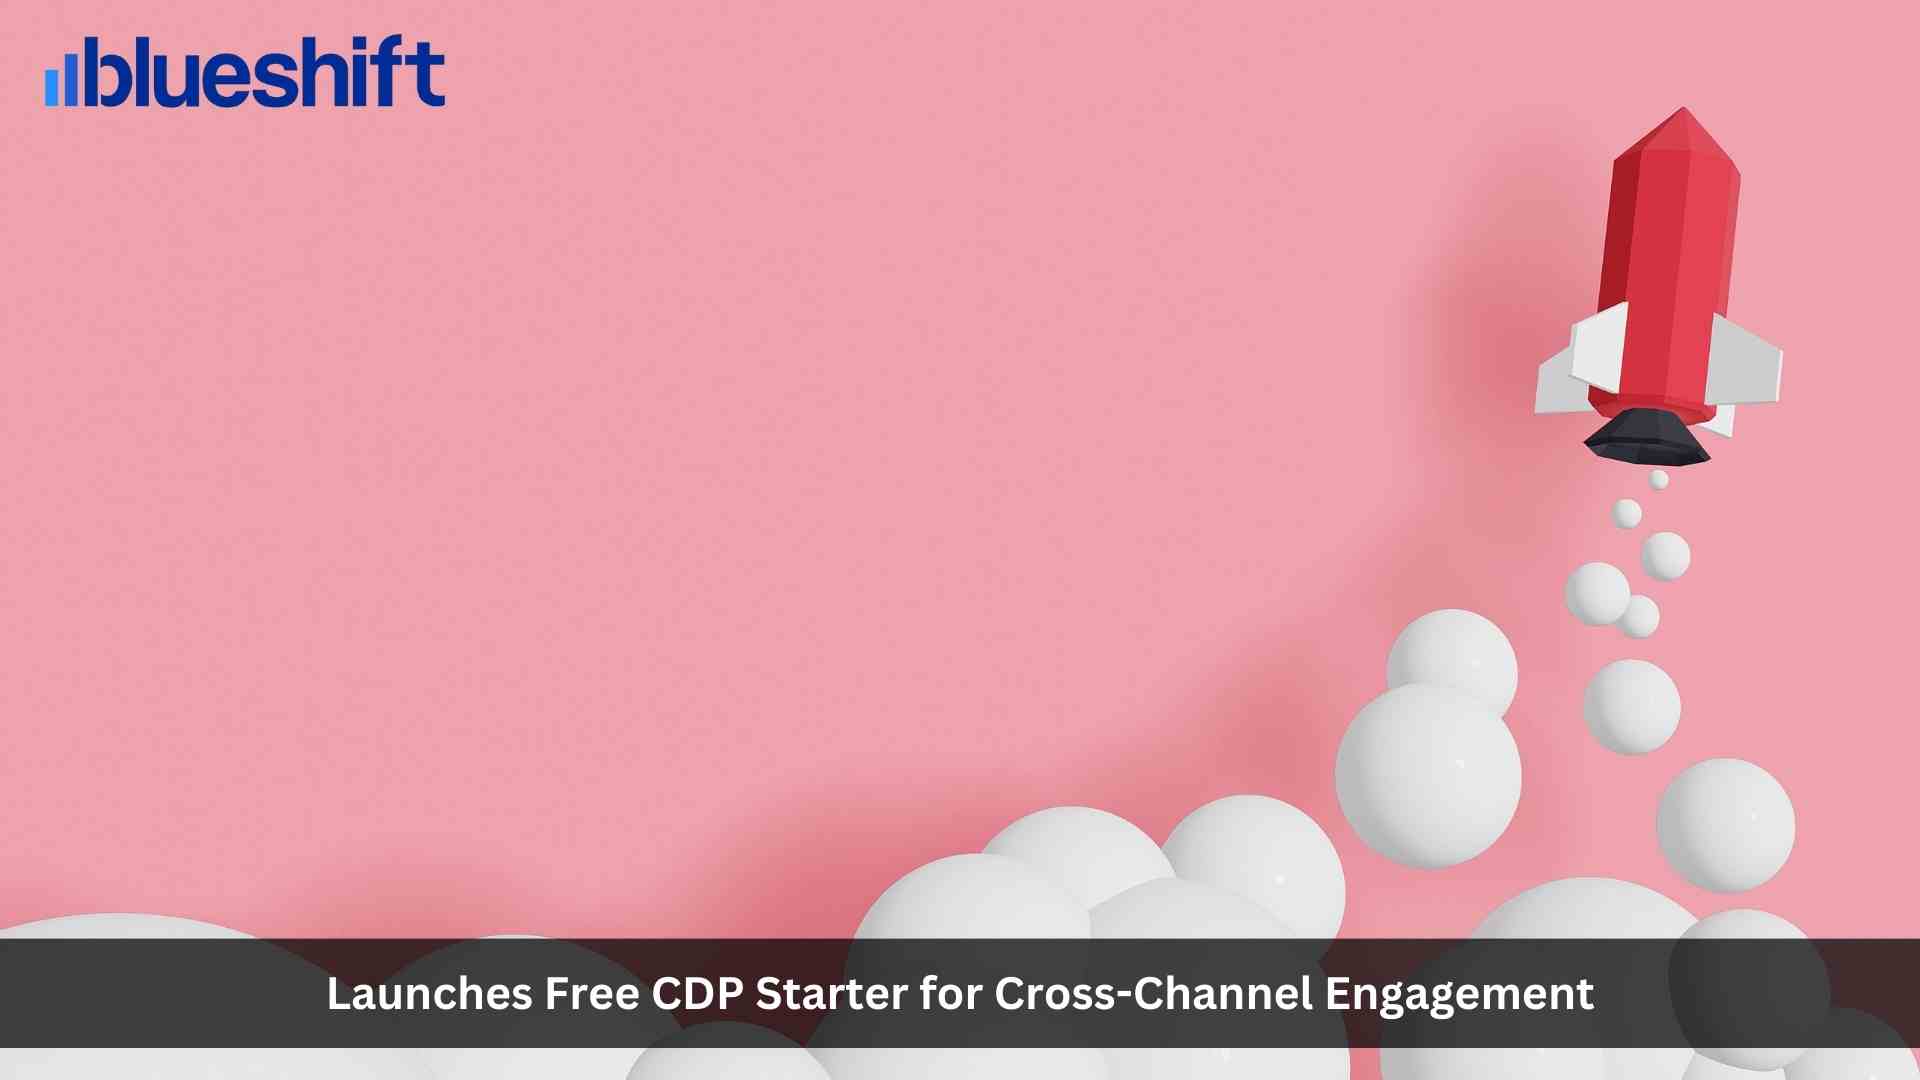 Blueshift Launches Free CDP Starter For Cross-Channel Engagement